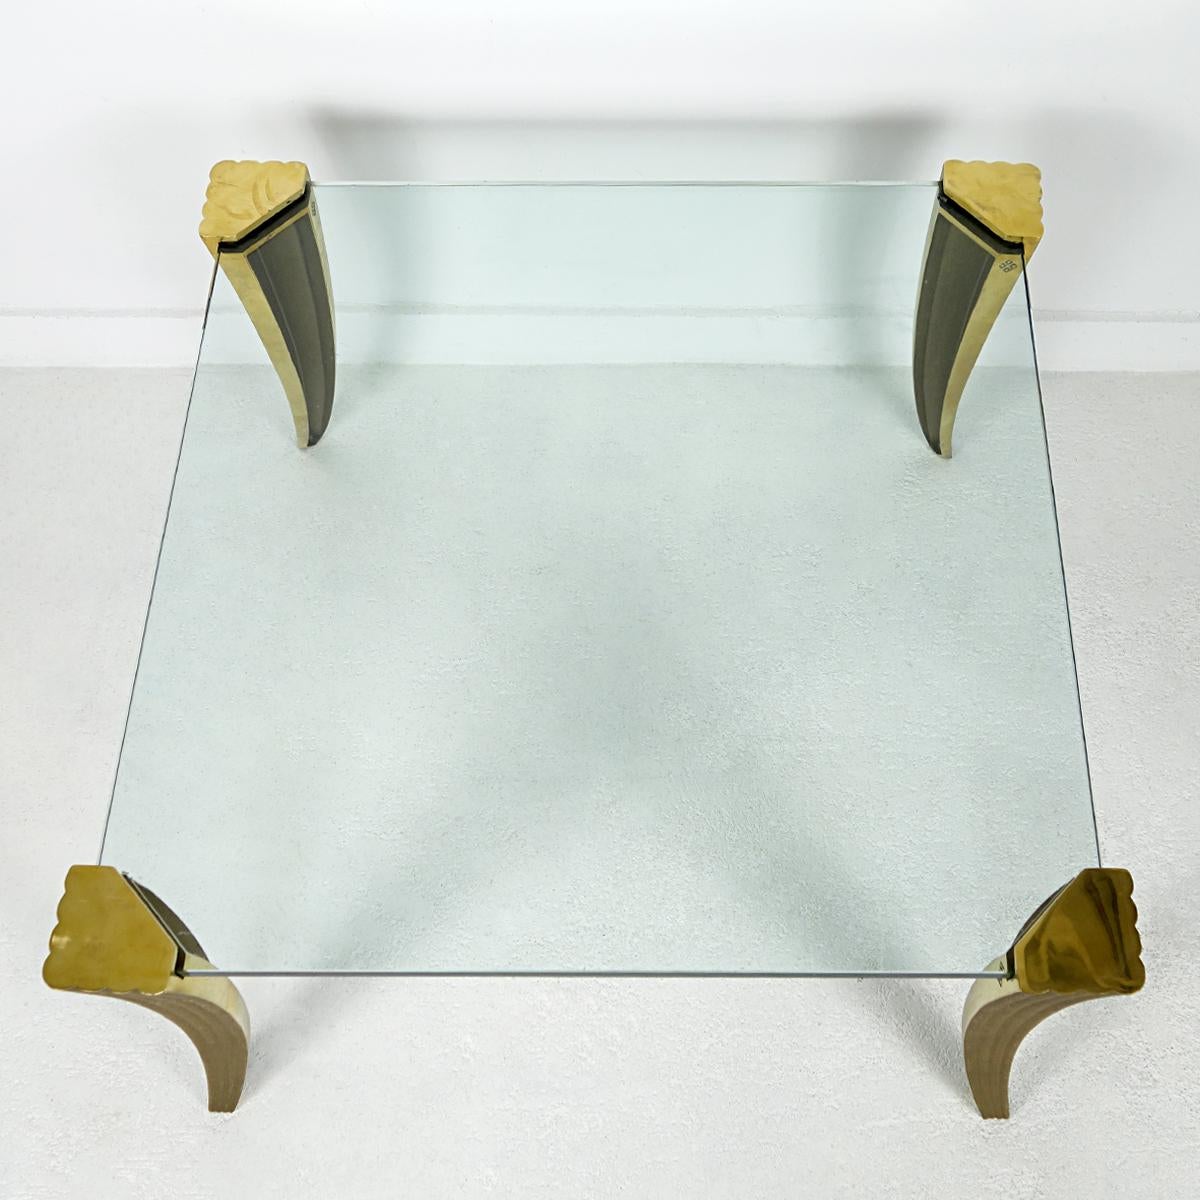 Dutch Square Hollywood Regency Coffee Table Made of Glass and Brass by Ghyczy For Sale